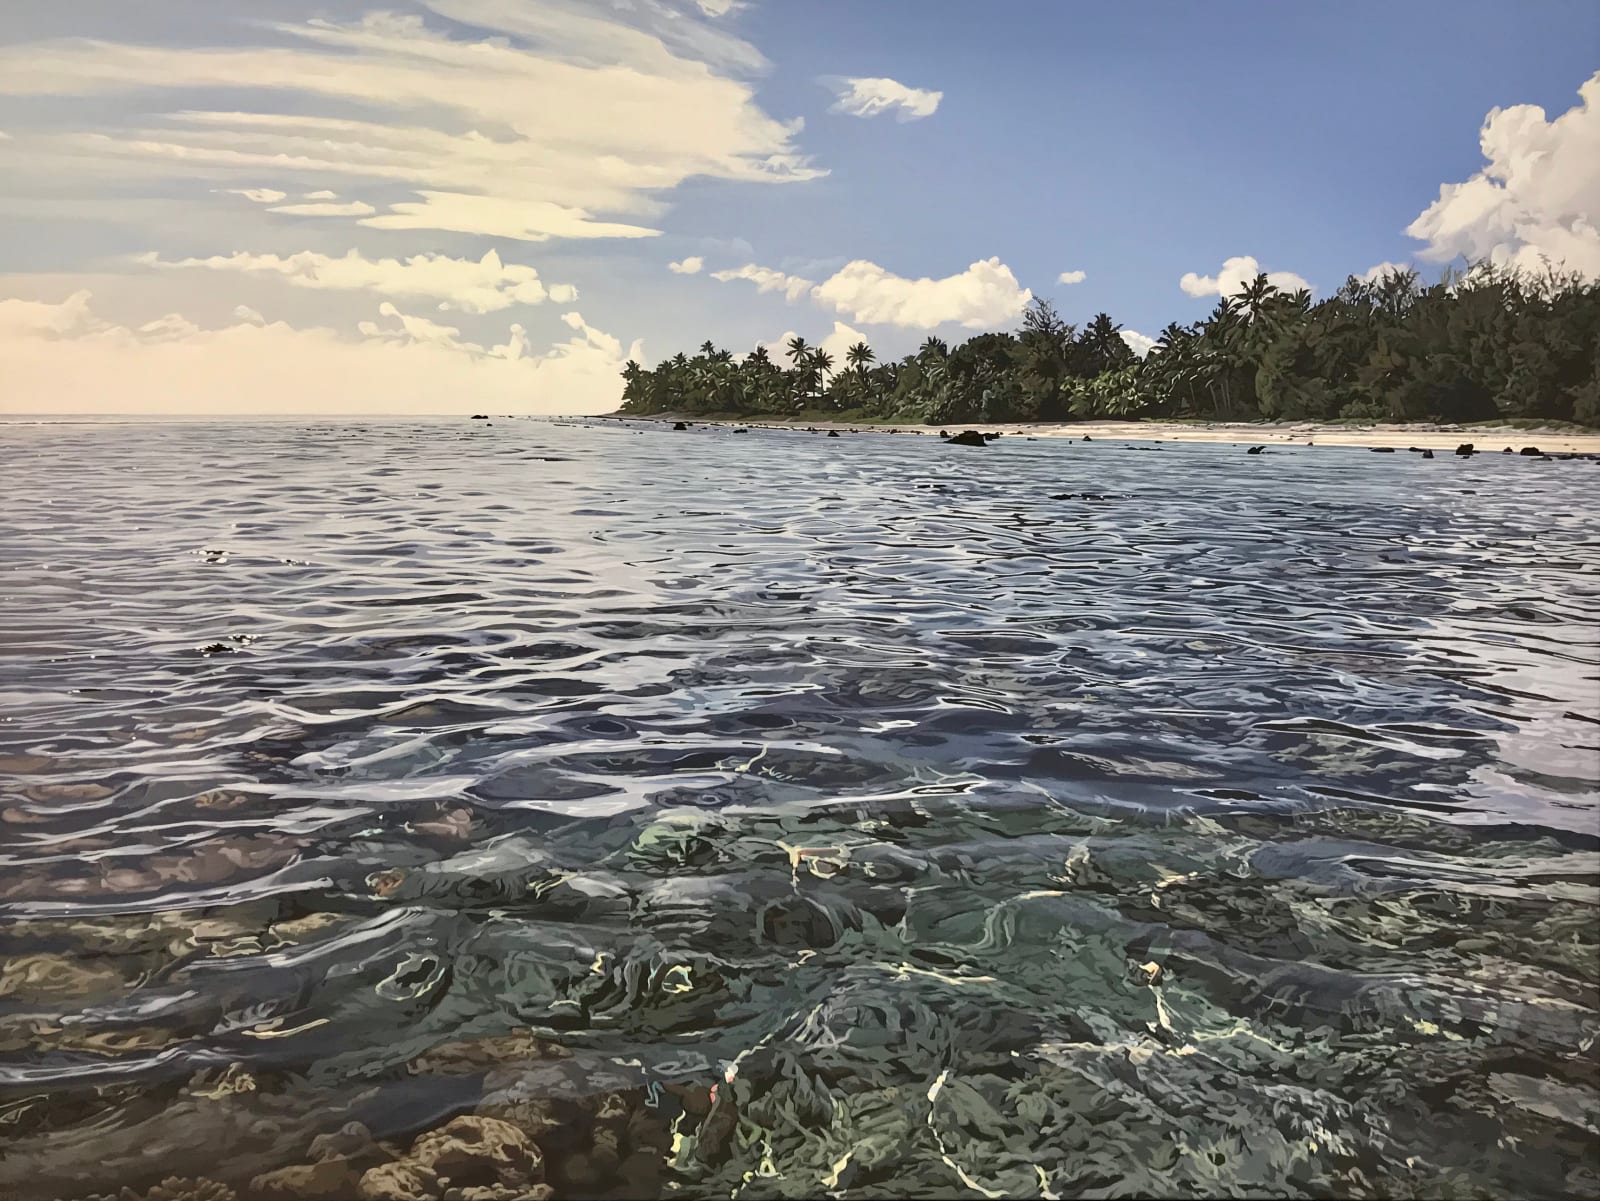 Matthew Payne, From the Reef, Pue, 2018